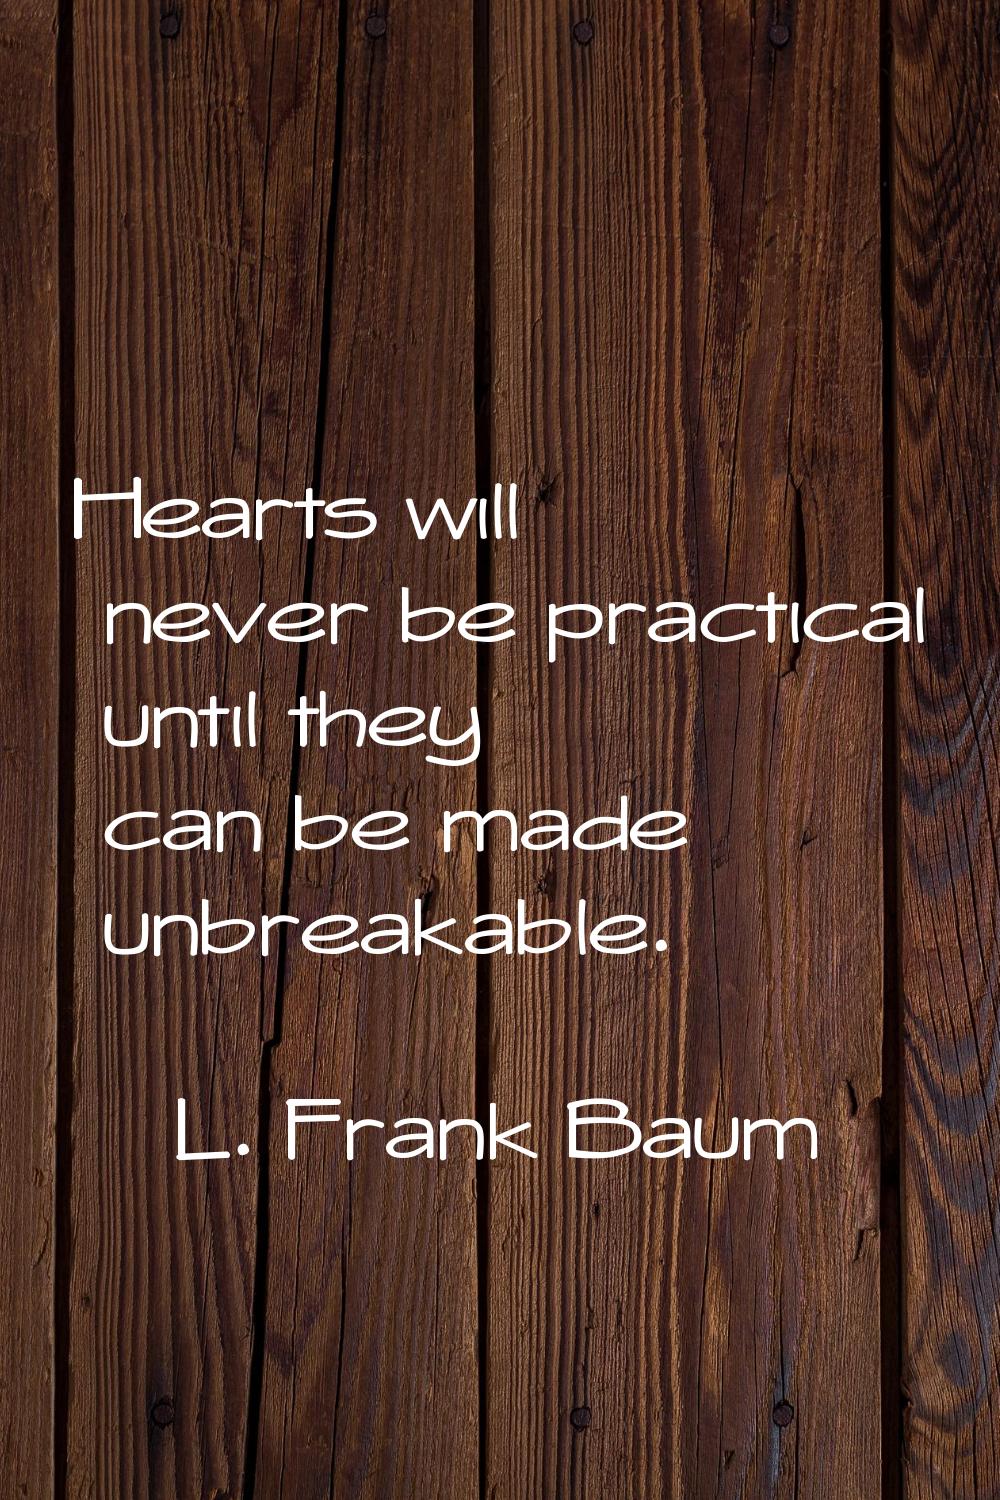 Hearts will never be practical until they can be made unbreakable.